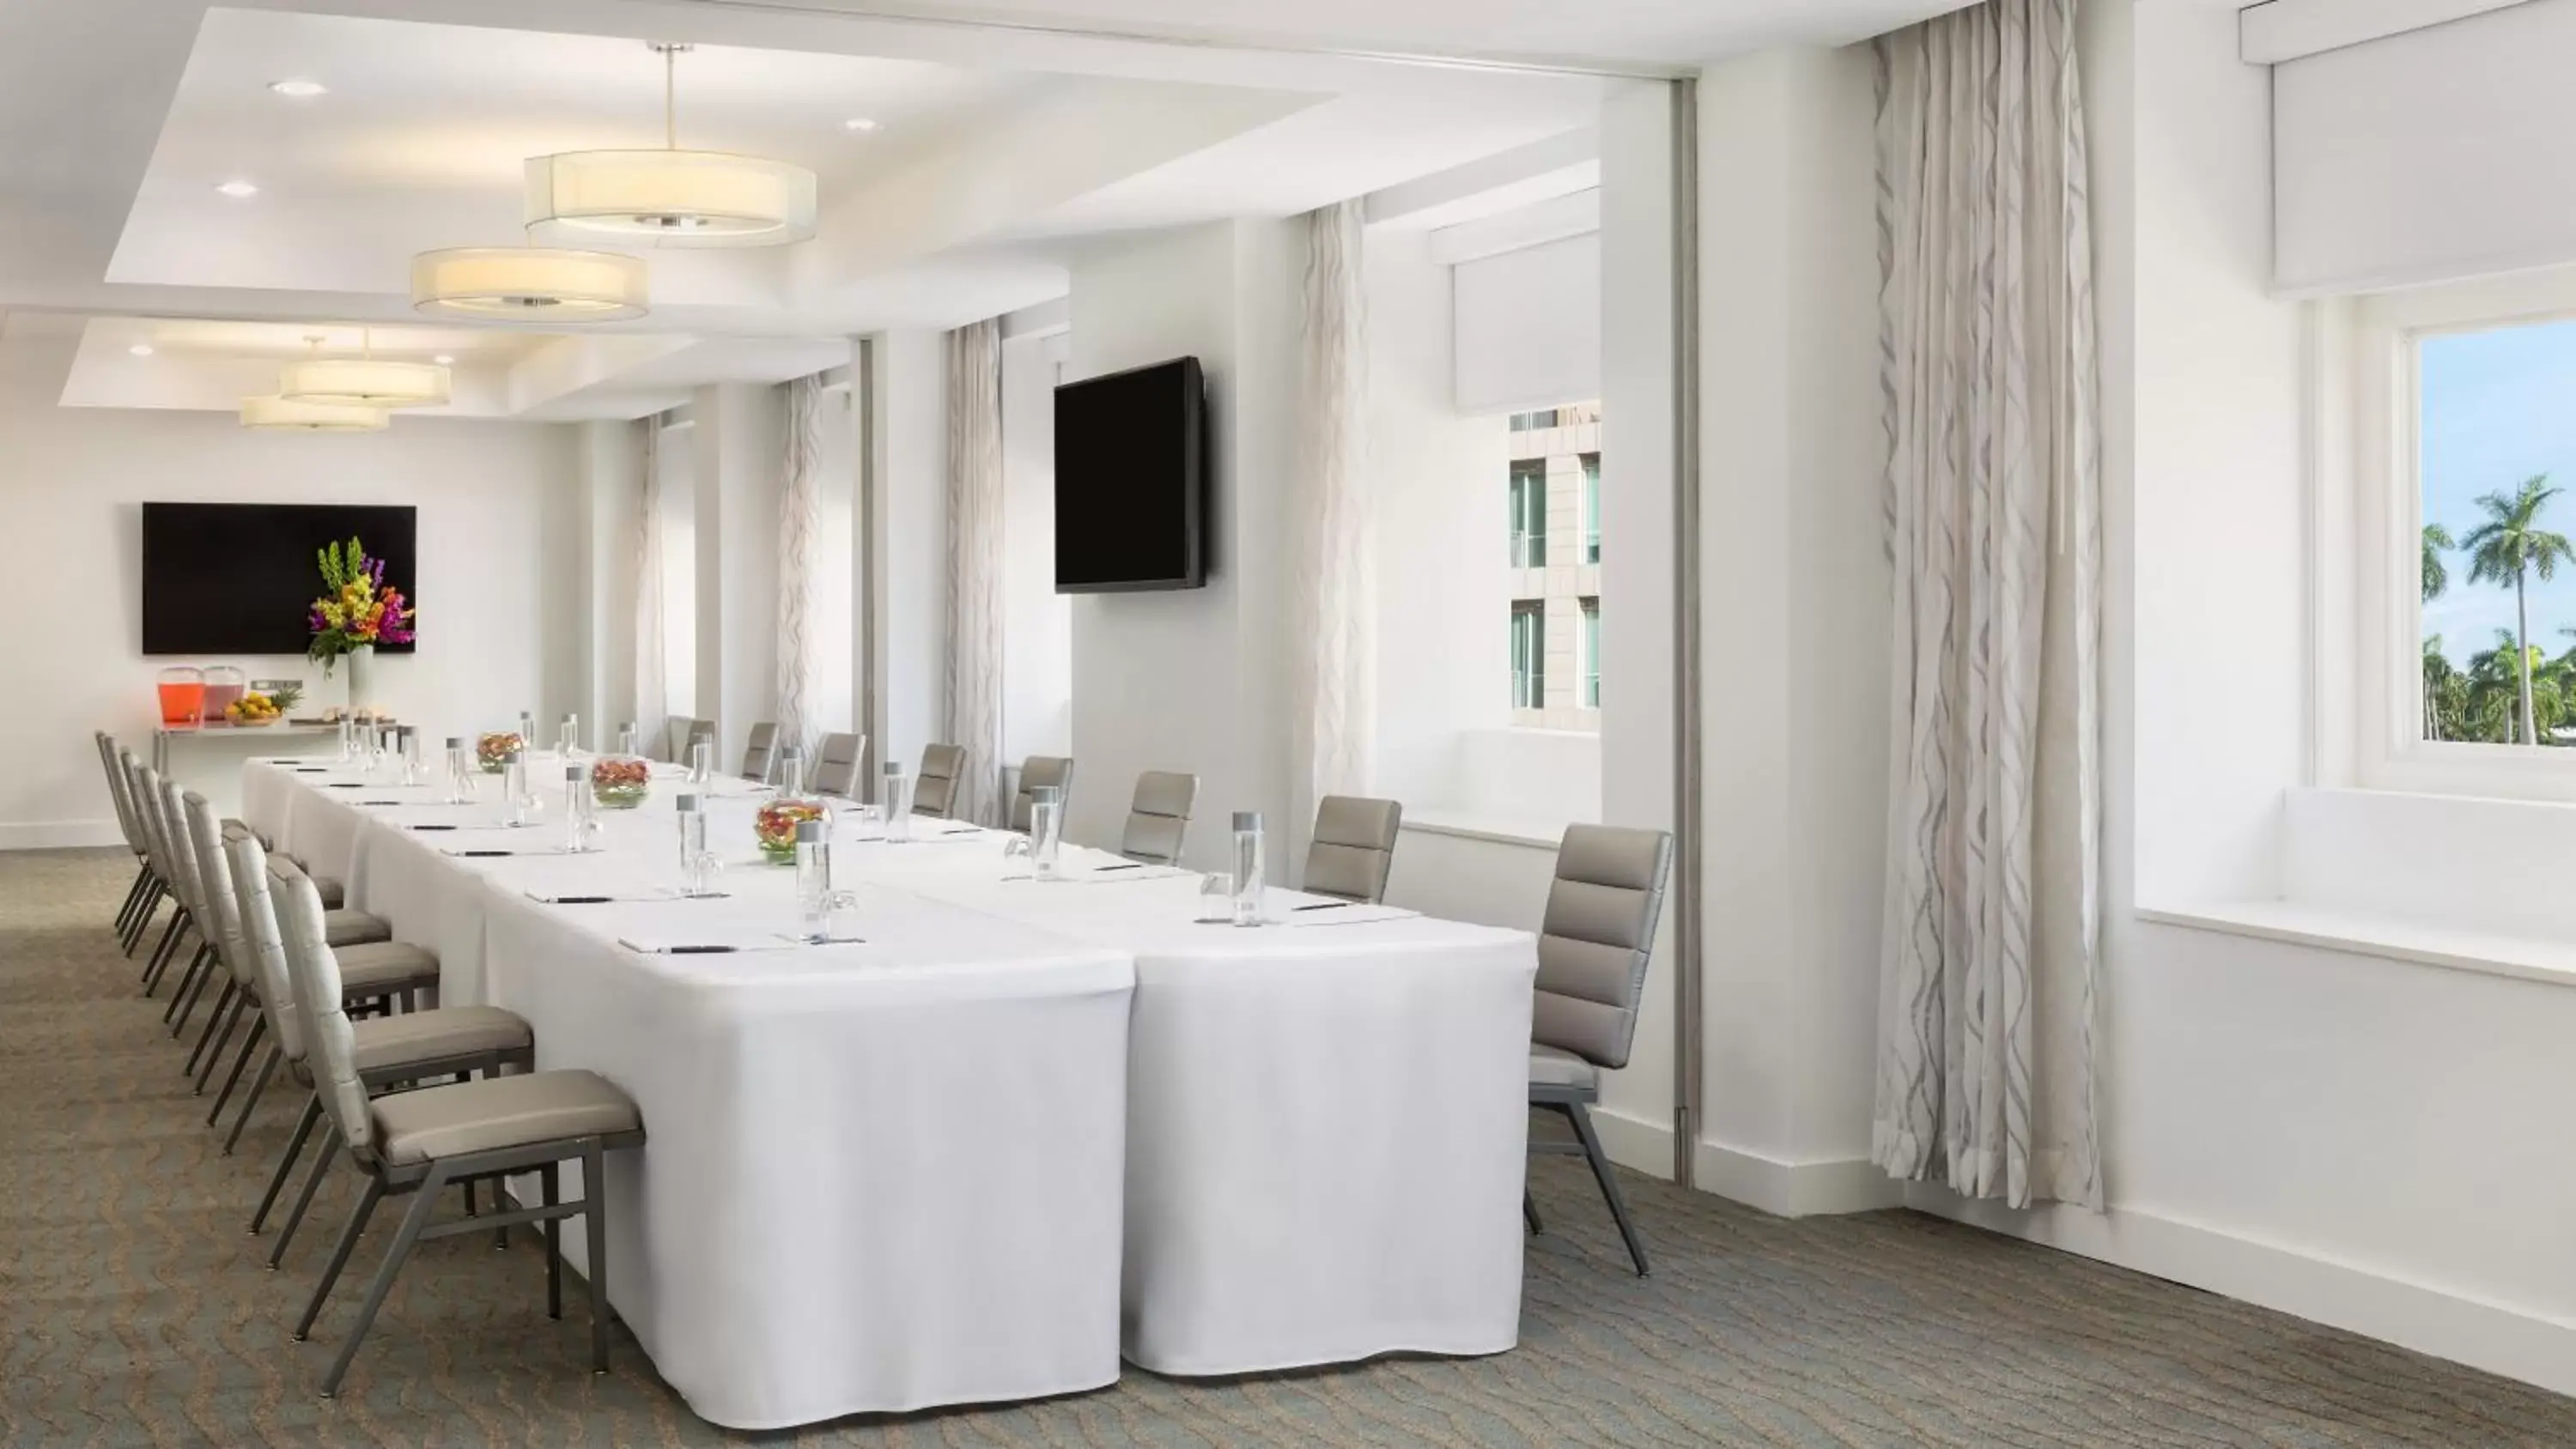 Meeting/conference room in YVE Hotel Miami